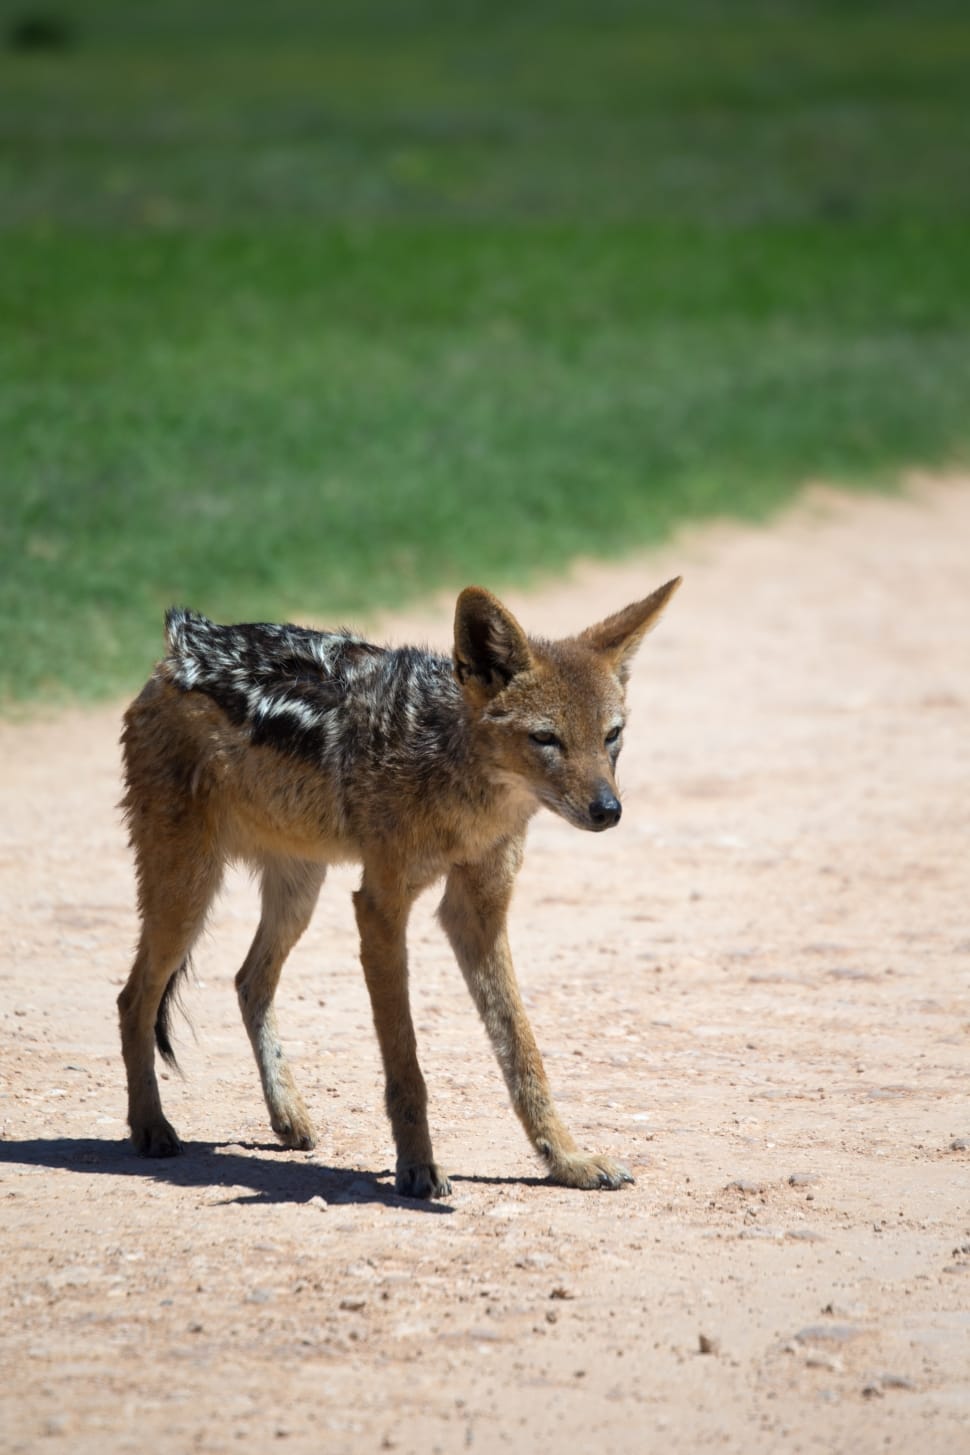 Wildlife, Jackal, Canine, Scavenger, animals in the wild, animal wildlife preview